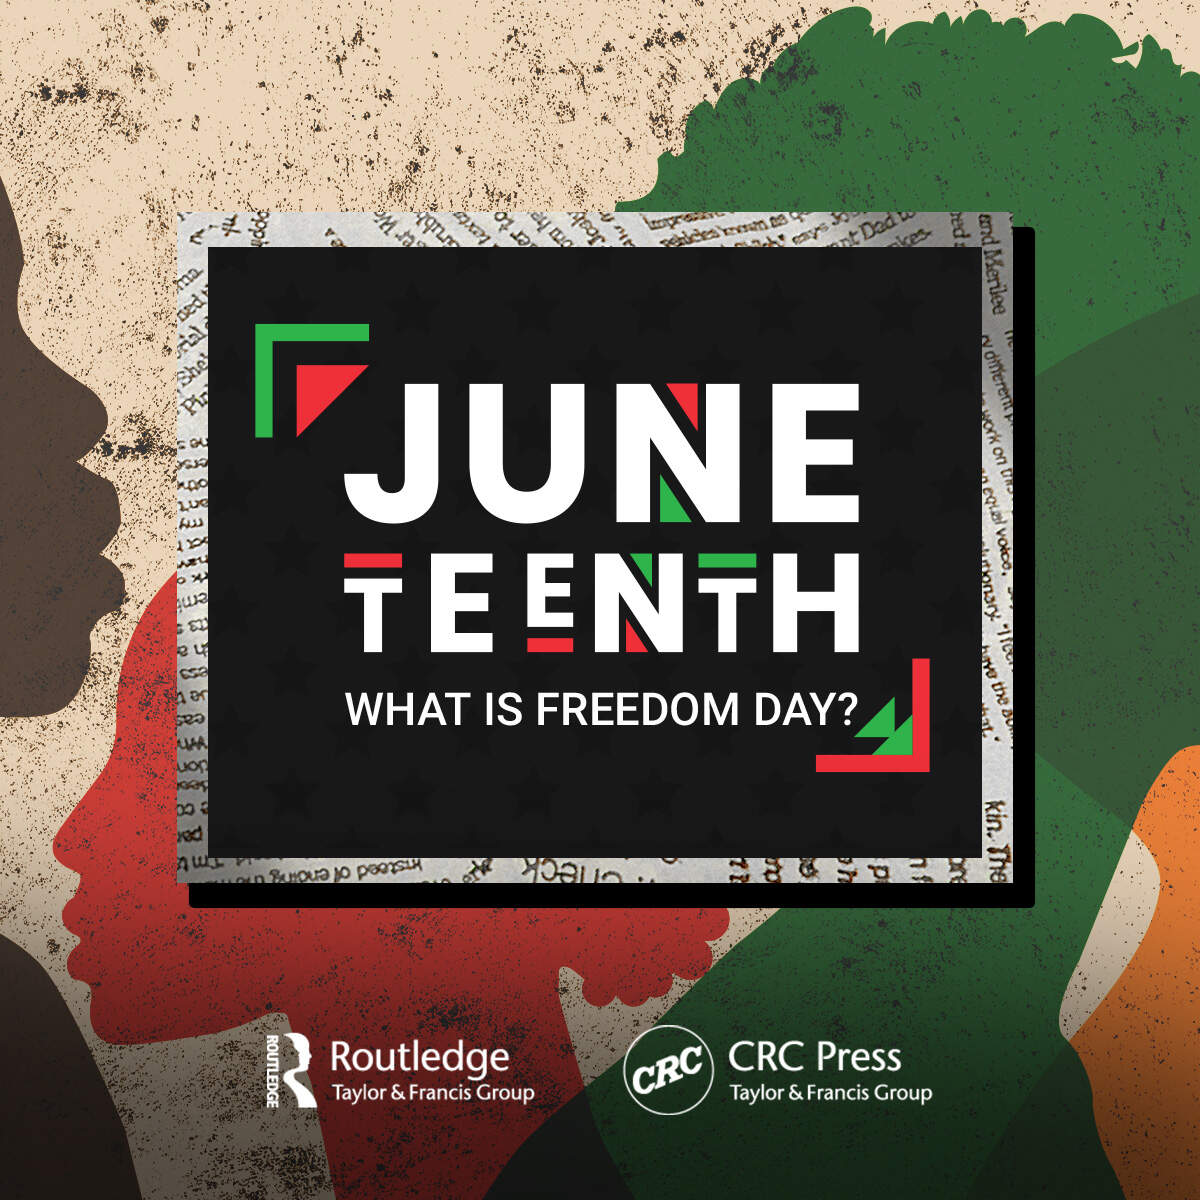 Caribbean flag colors with silhouettes of African faces and copy: Juneteenth, what is freedom day?